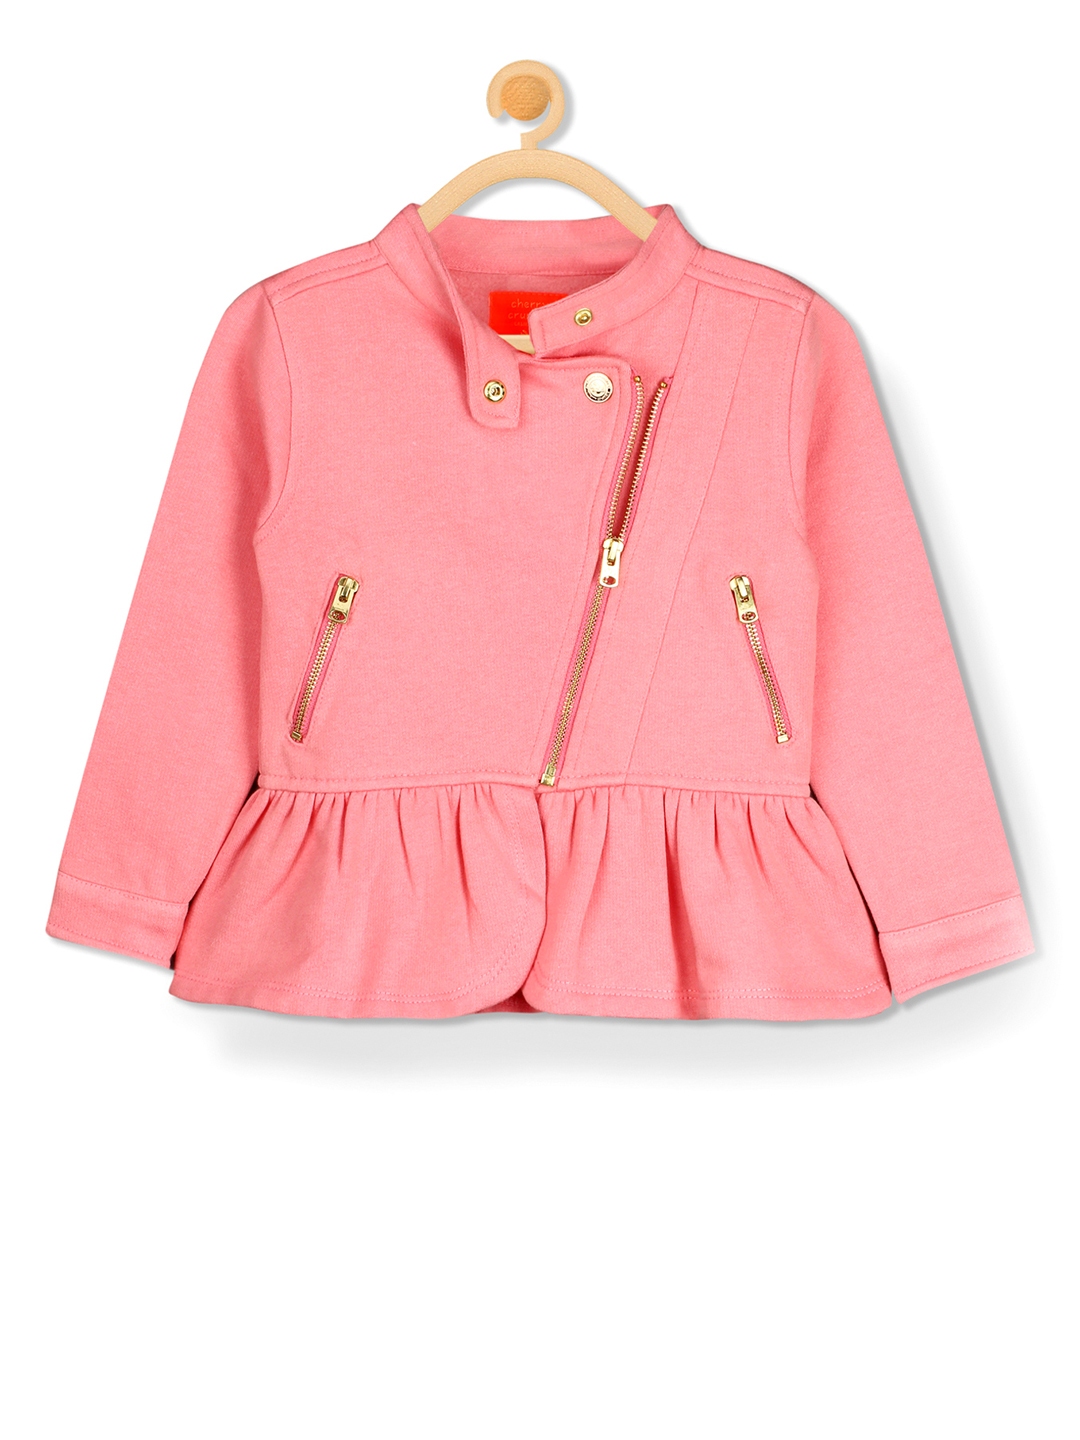 Buy Cherry Crumble Girls Pink Solid Bomber Jacket - Jackets for Girls